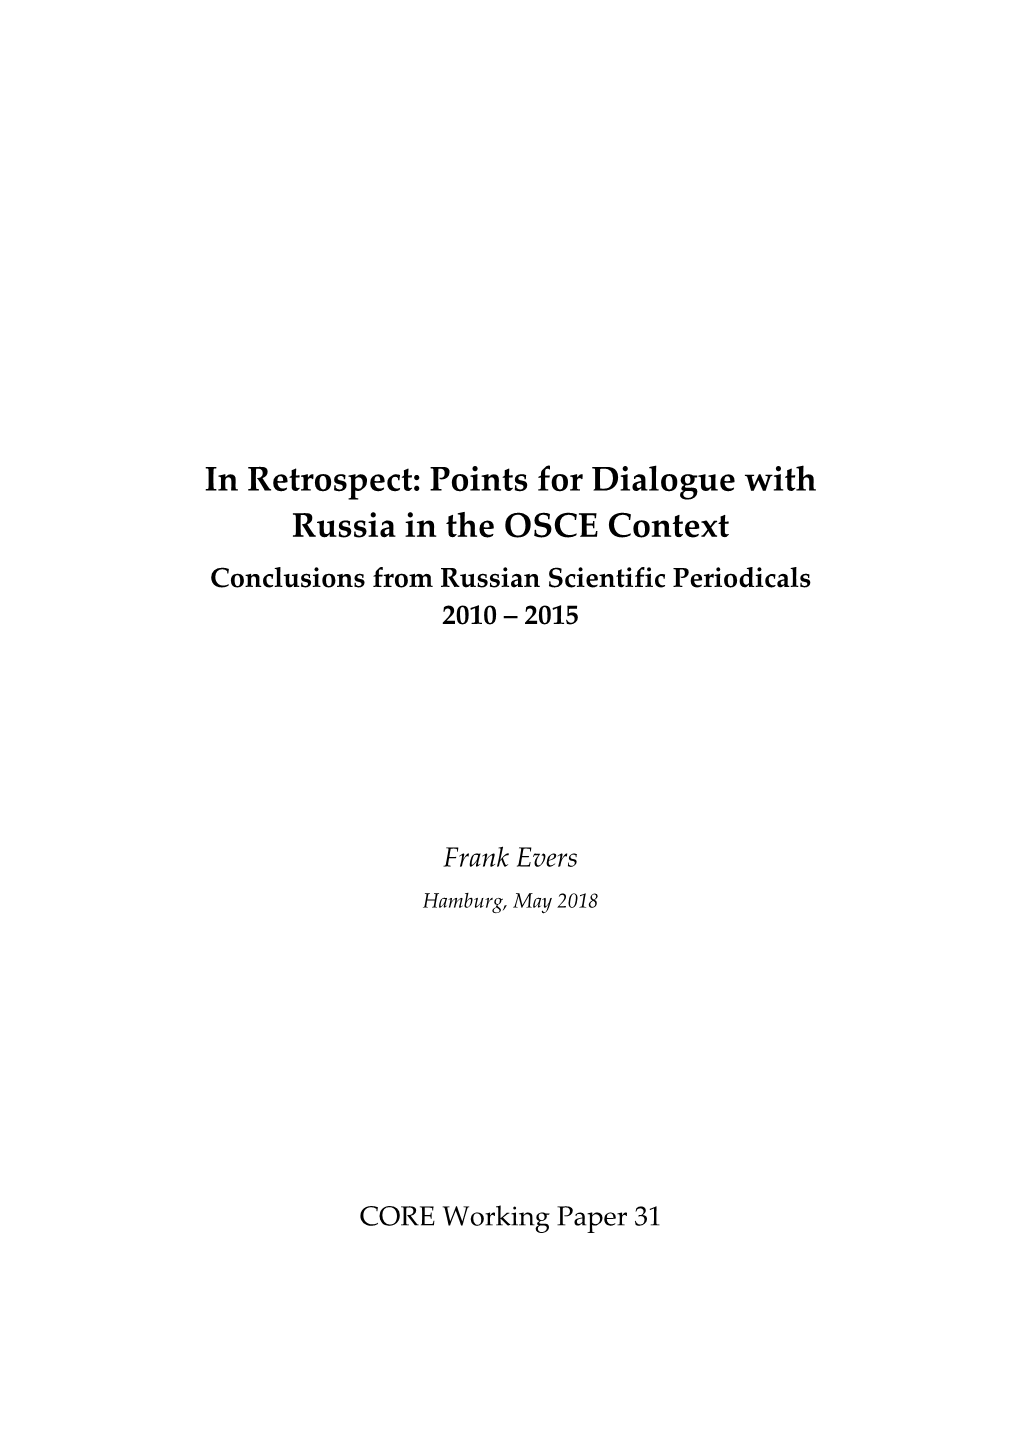 In Retrospect: Points for Dialogue with Russia in the OSCE Context Conclusions from Russian Scientific Periodicals 2010 – 2015